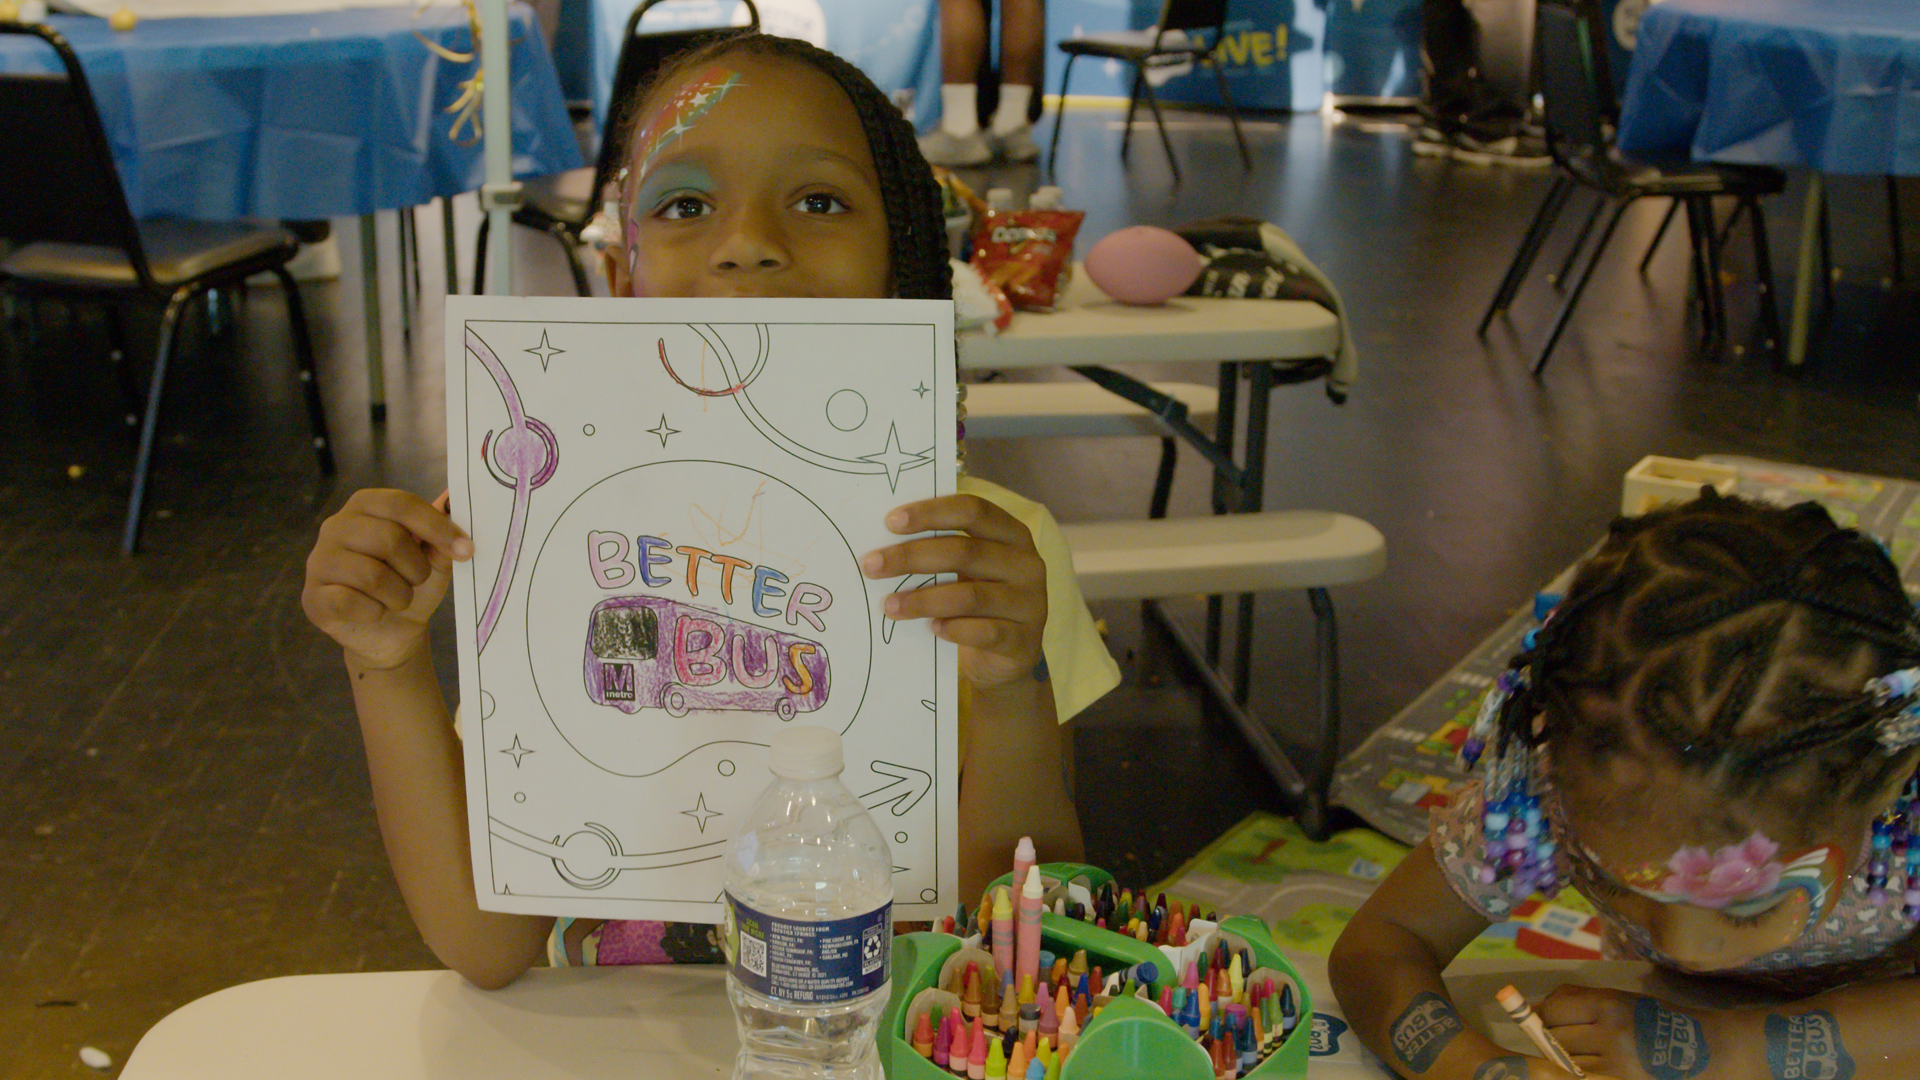 The communities had the chance to be creative with our different activities, from coloring to live music.